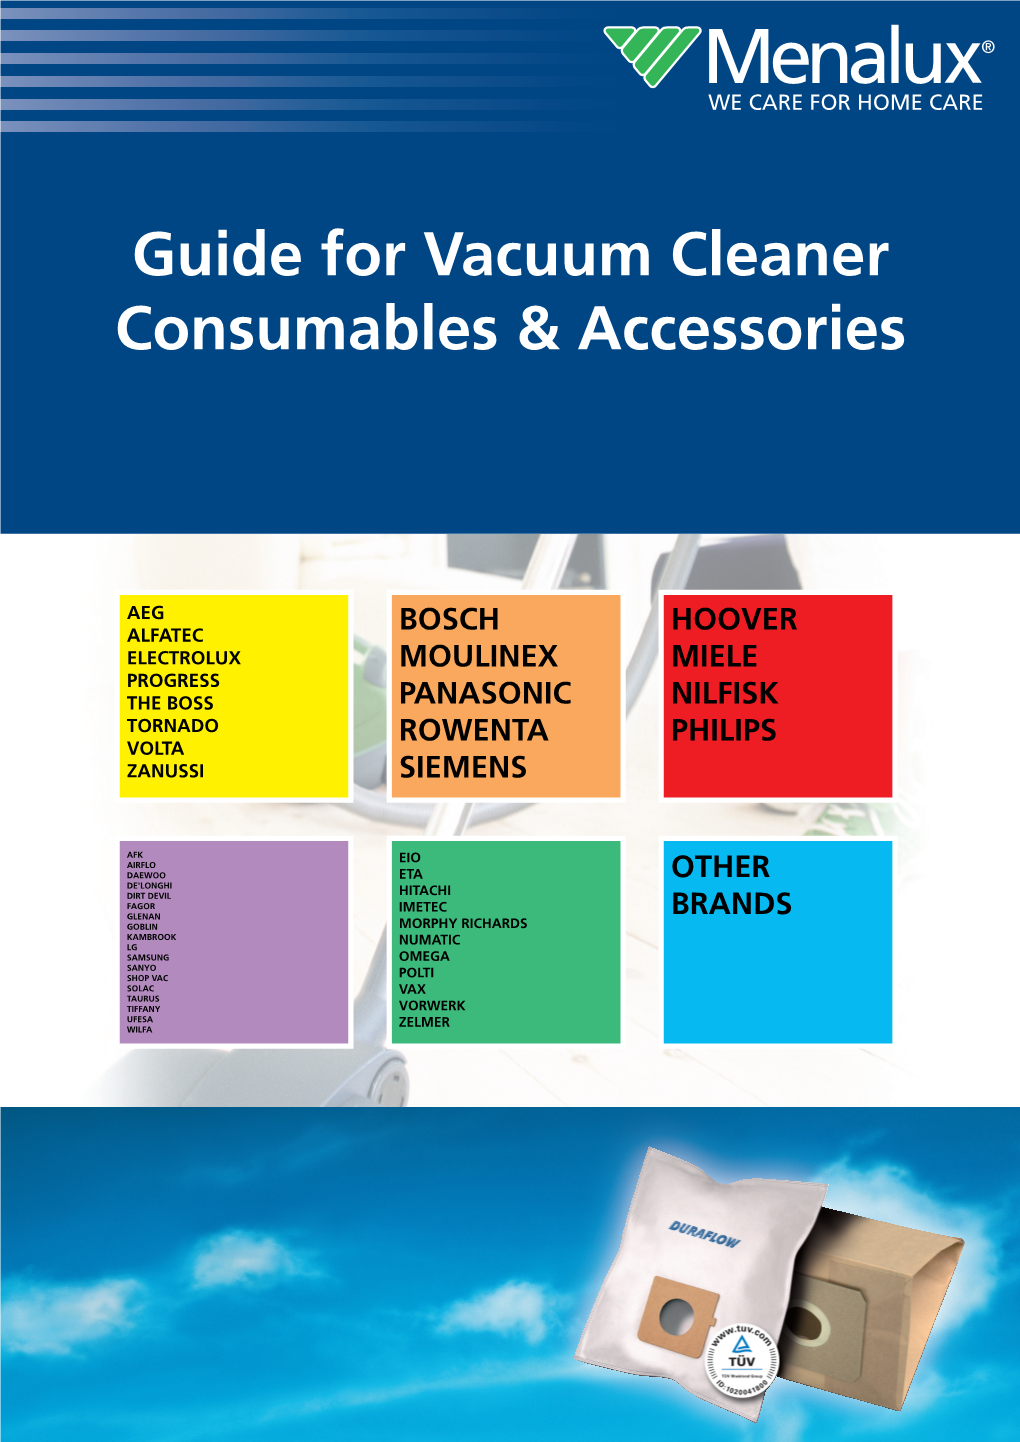 Guide for Vacuum Cleaner Consumables & Accessories